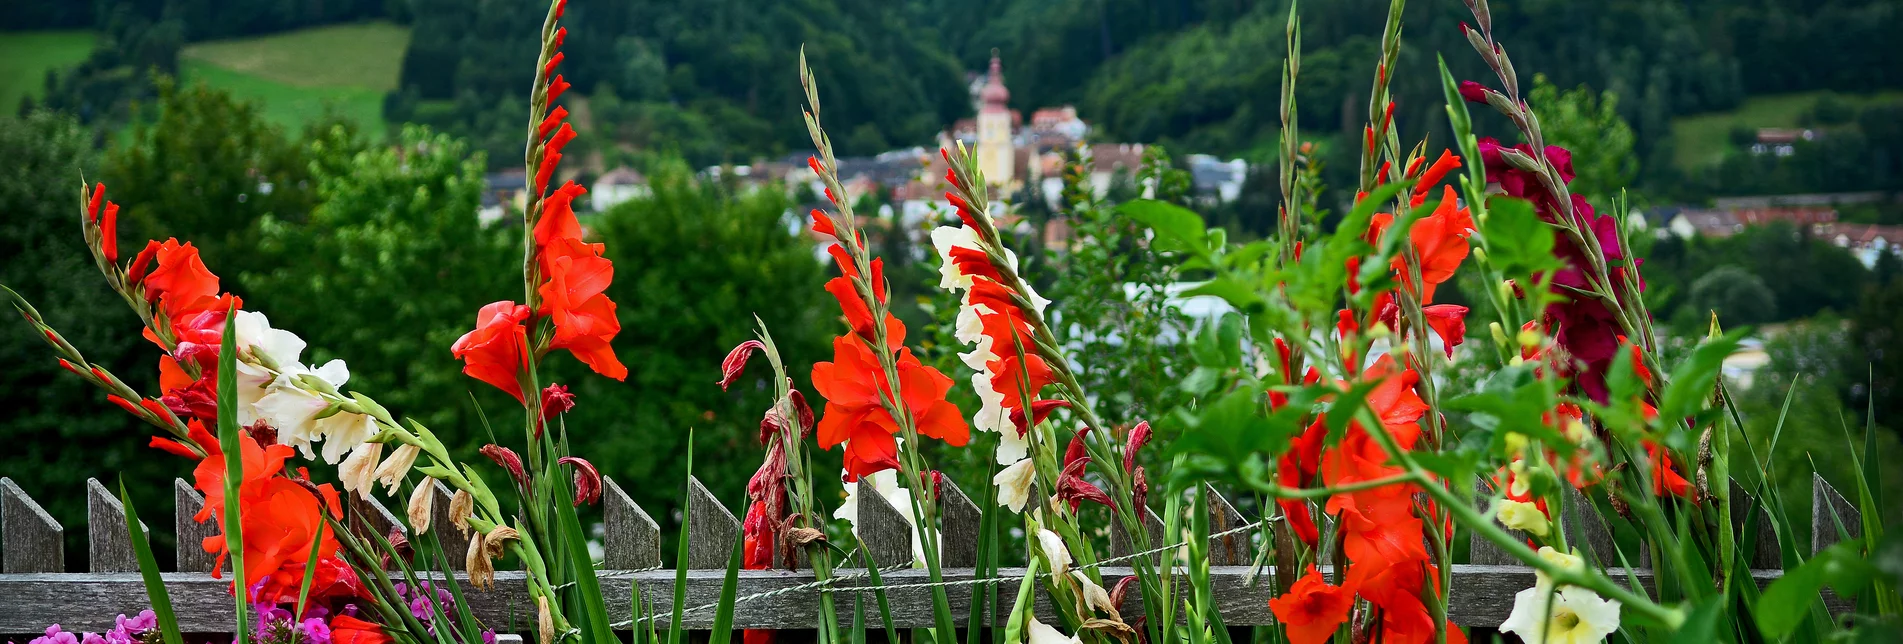 Flowers and greenery in the background | © Oststeiermark Tourismus | Christian Strassegger